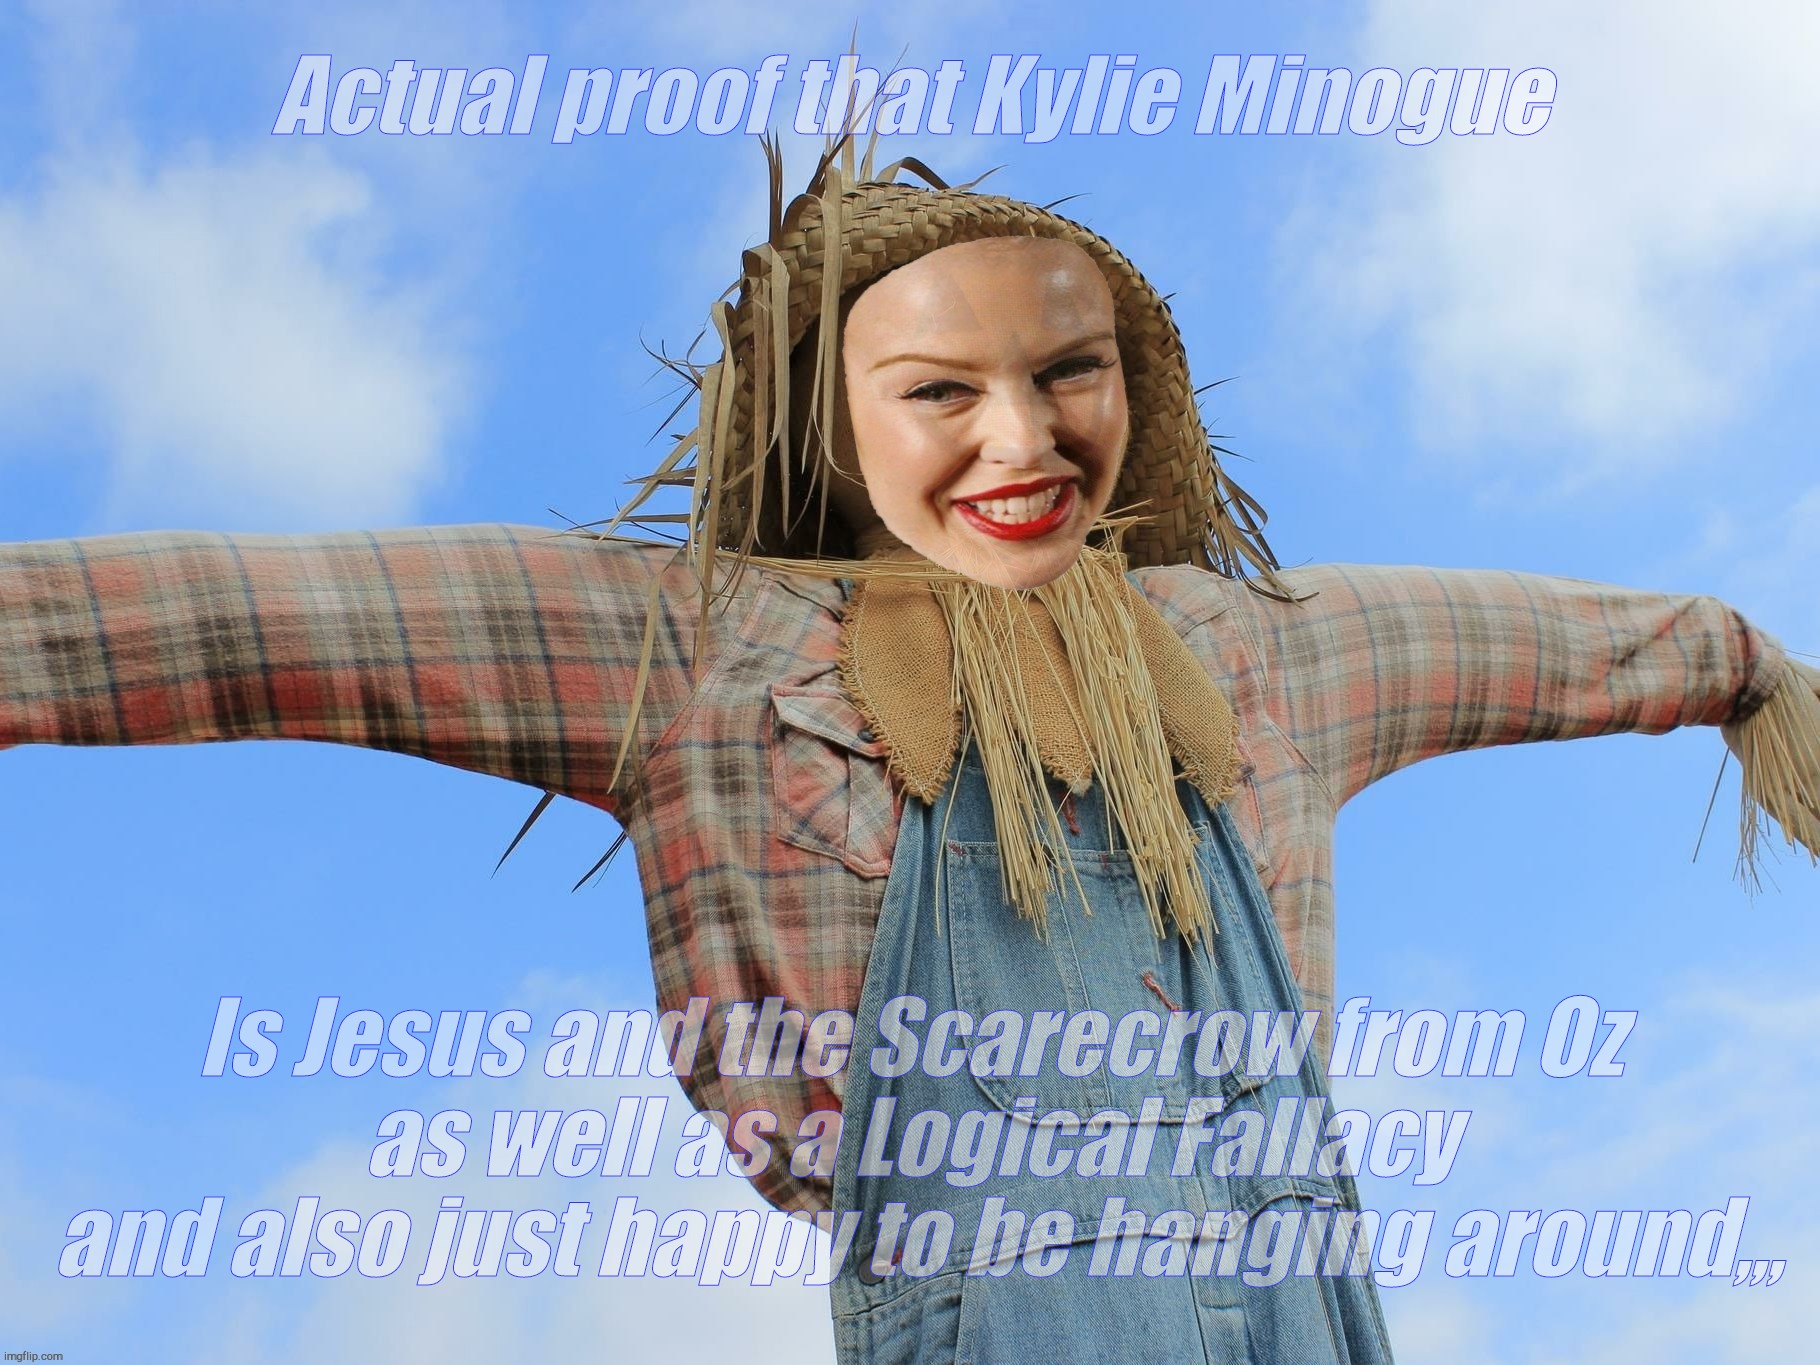 Not an actual attack on Kylie, just pointing out the heights - or depths - Strawmanning can often go | Actual proof that Kylie Minogue; Is Jesus and the Scarecrow from Oz
as well as a Logical Fallacy
 and also just happy to be hanging around,,, | image tagged in kylie strawman | made w/ Imgflip meme maker